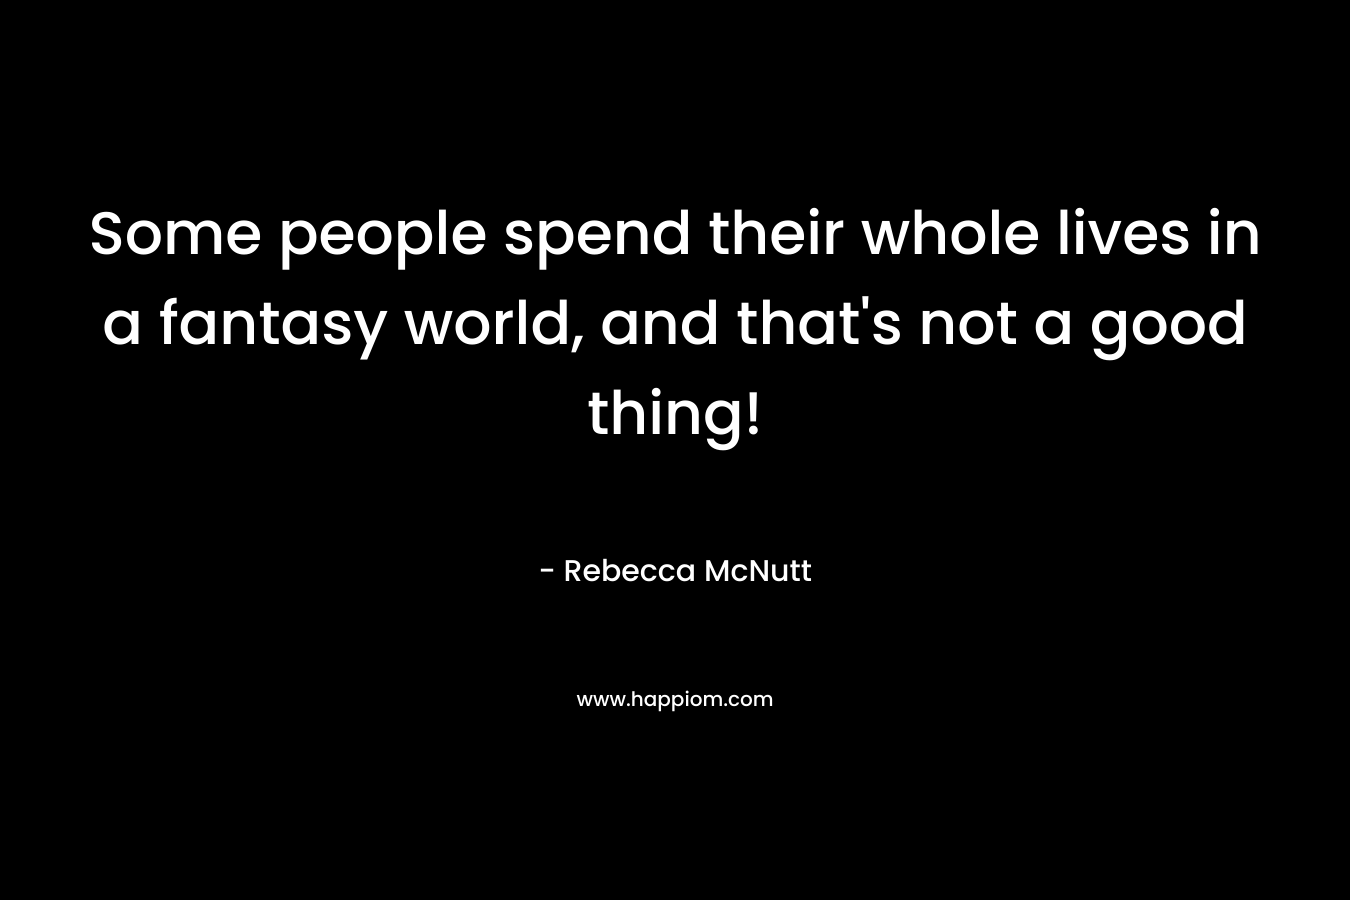 Some people spend their whole lives in a fantasy world, and that's not a good thing!